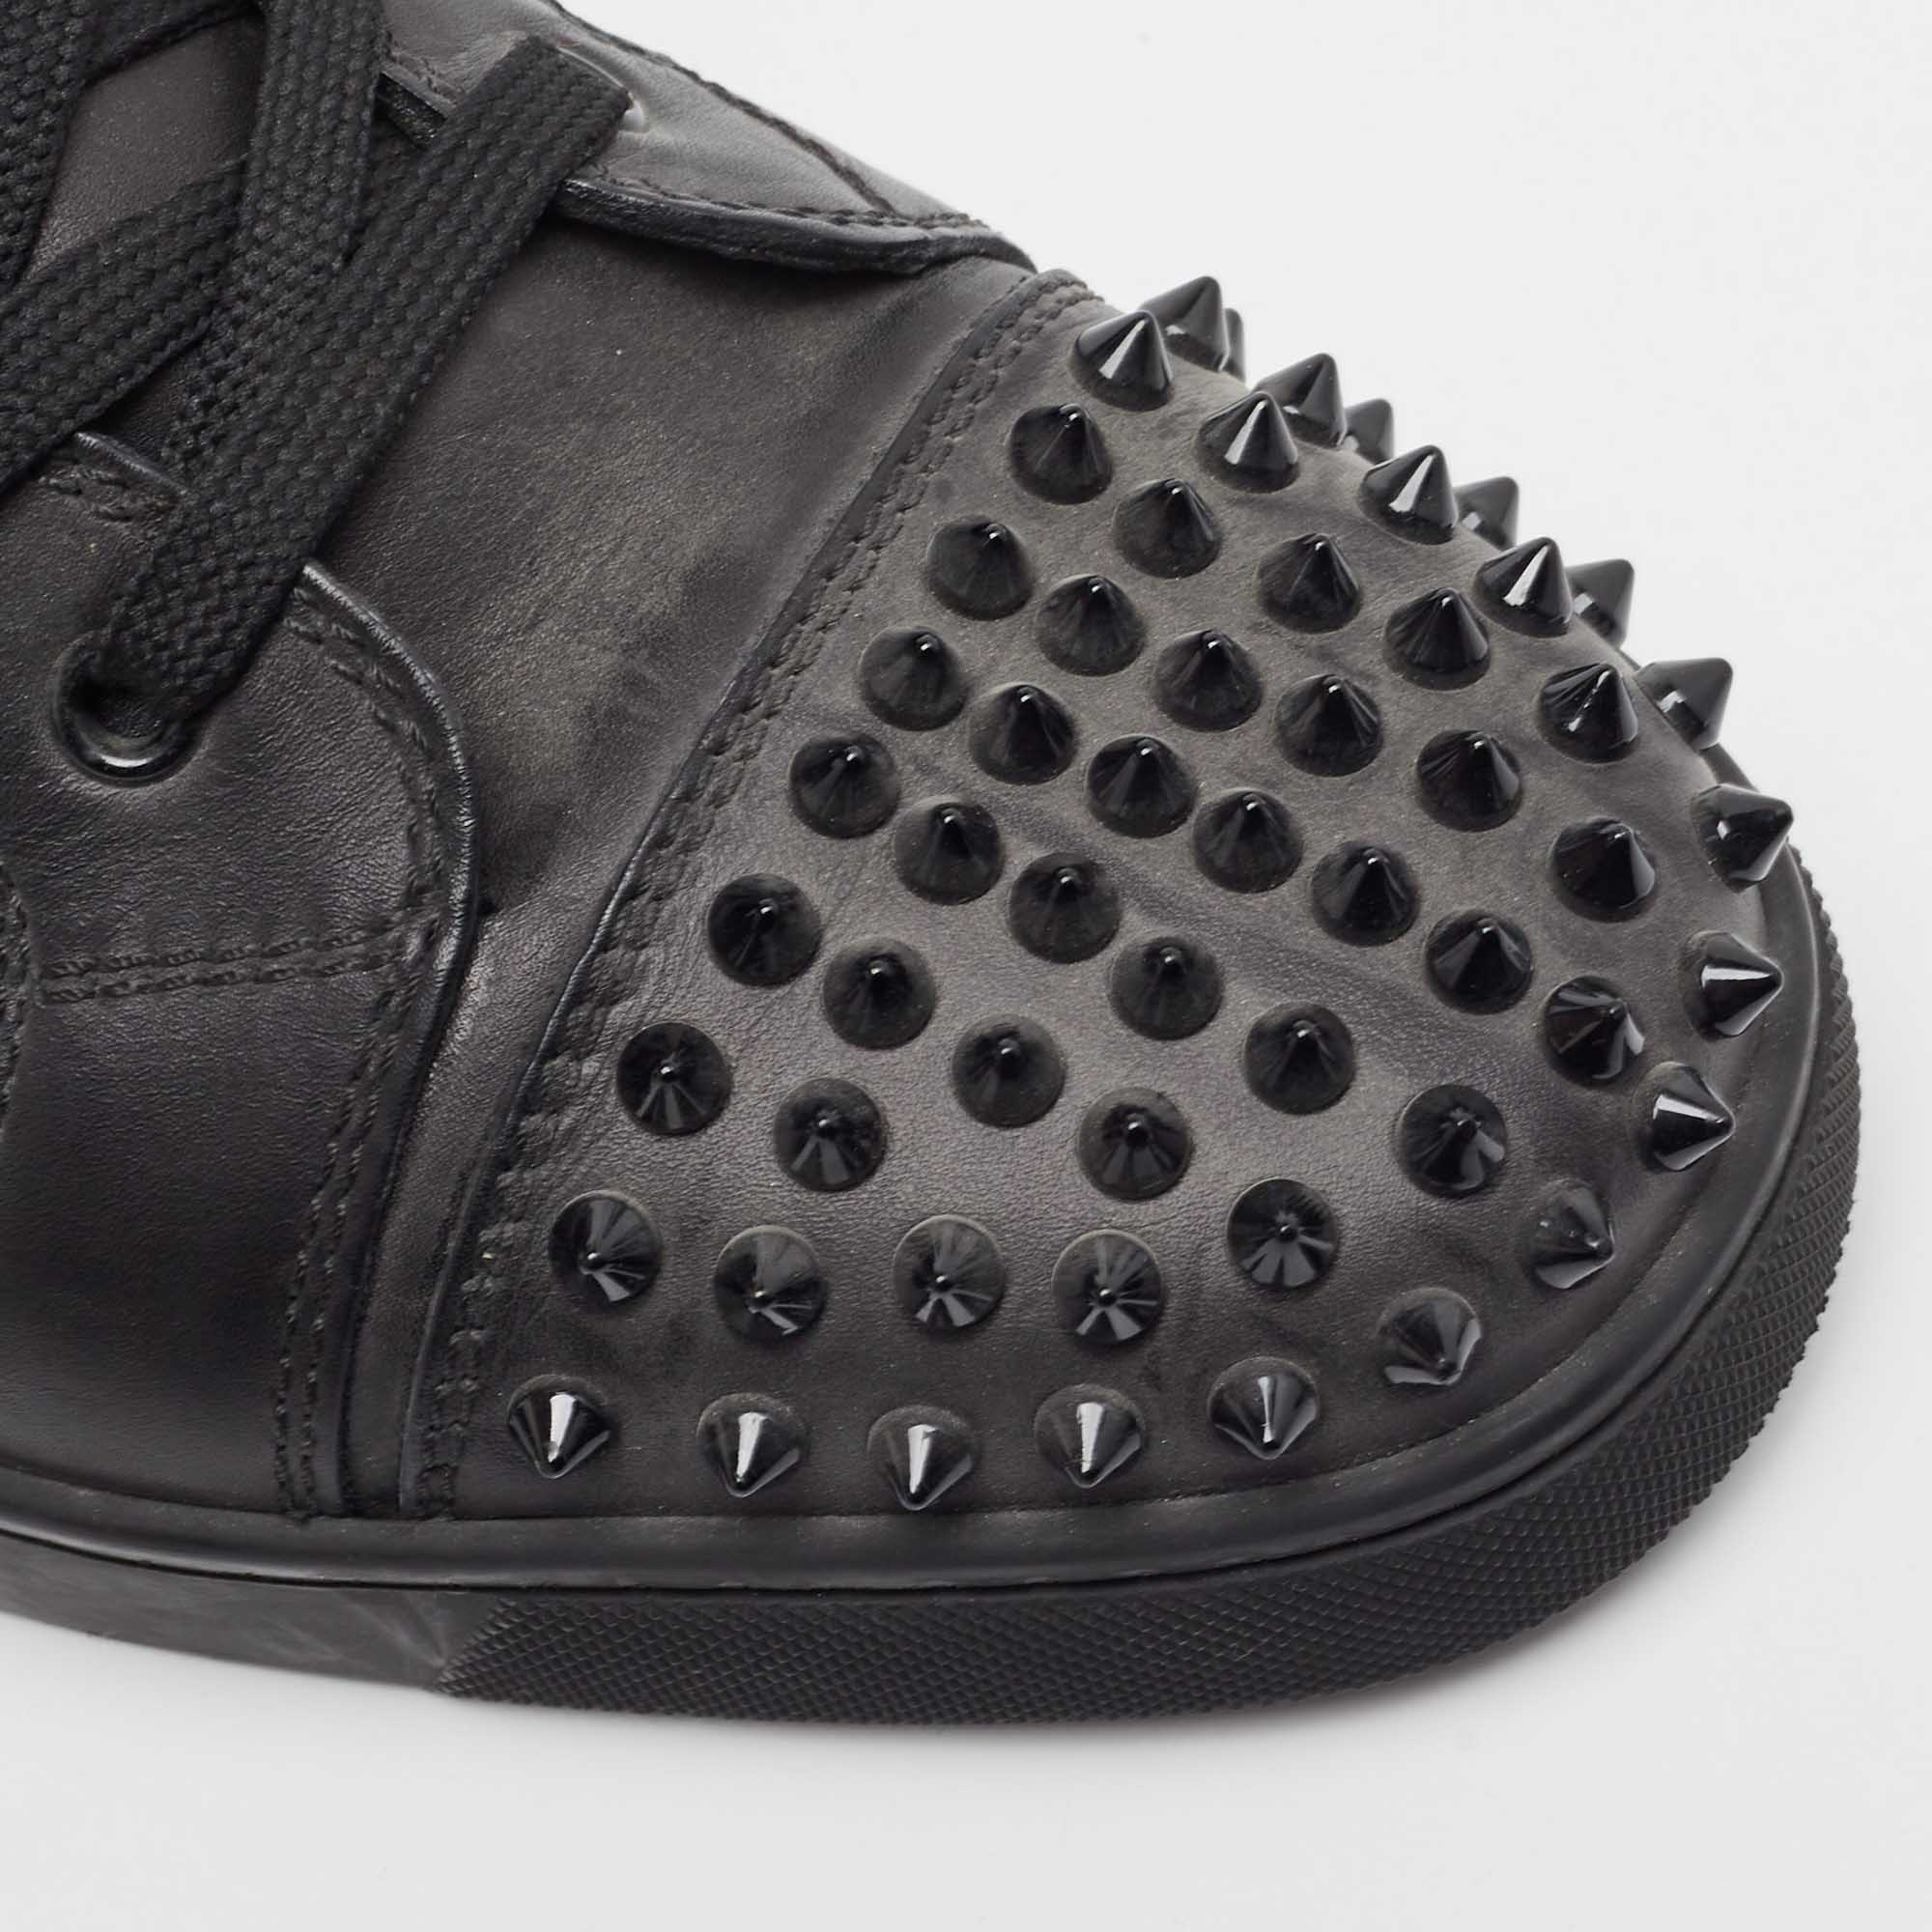 Christian Louboutin Black Leather Lou Spikes Sneakers Size 42